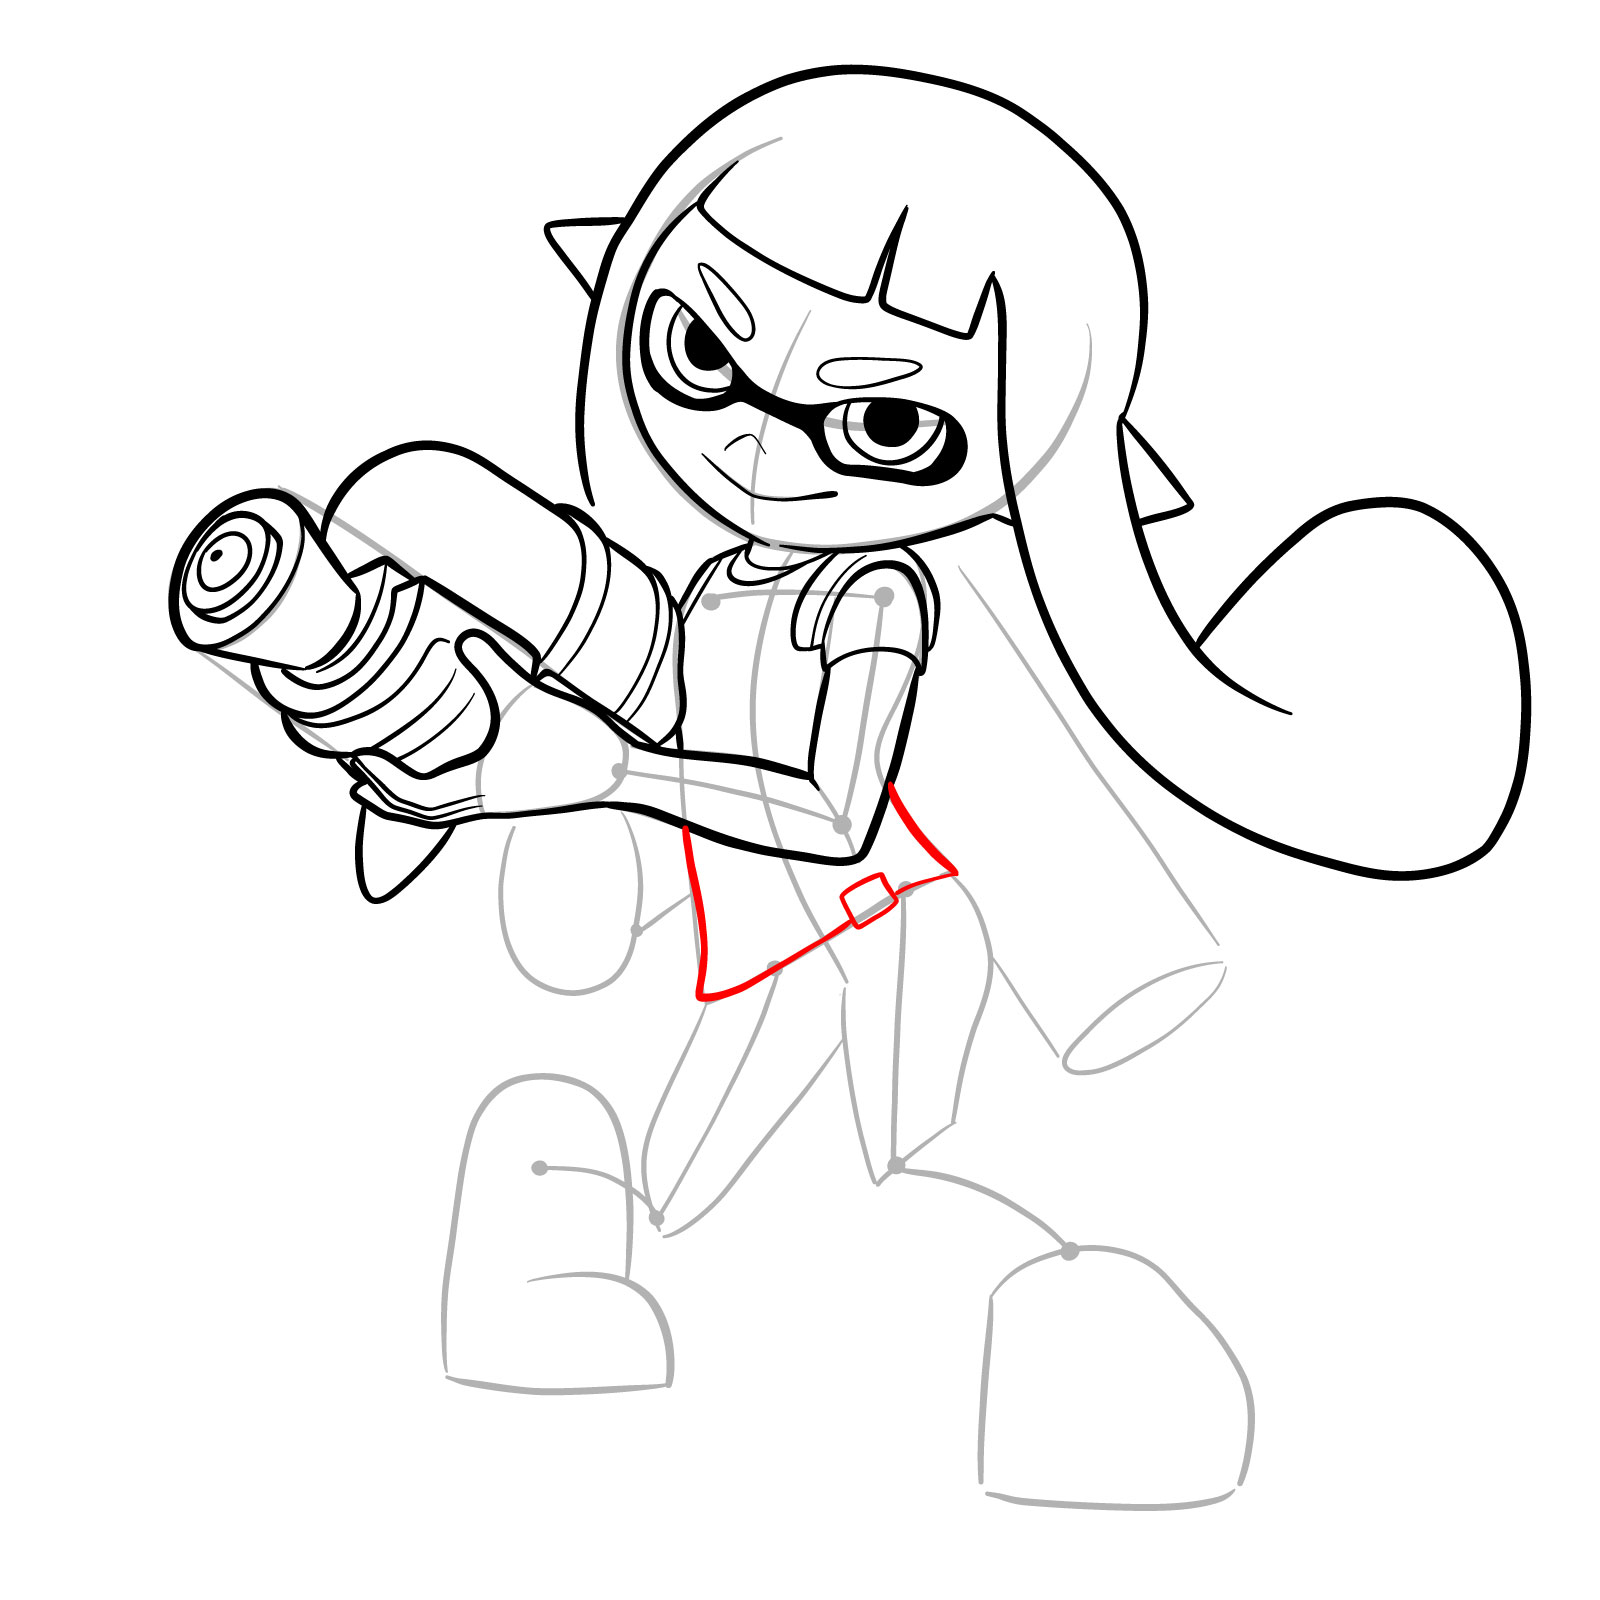 How to draw an Inkling Girl - step 20